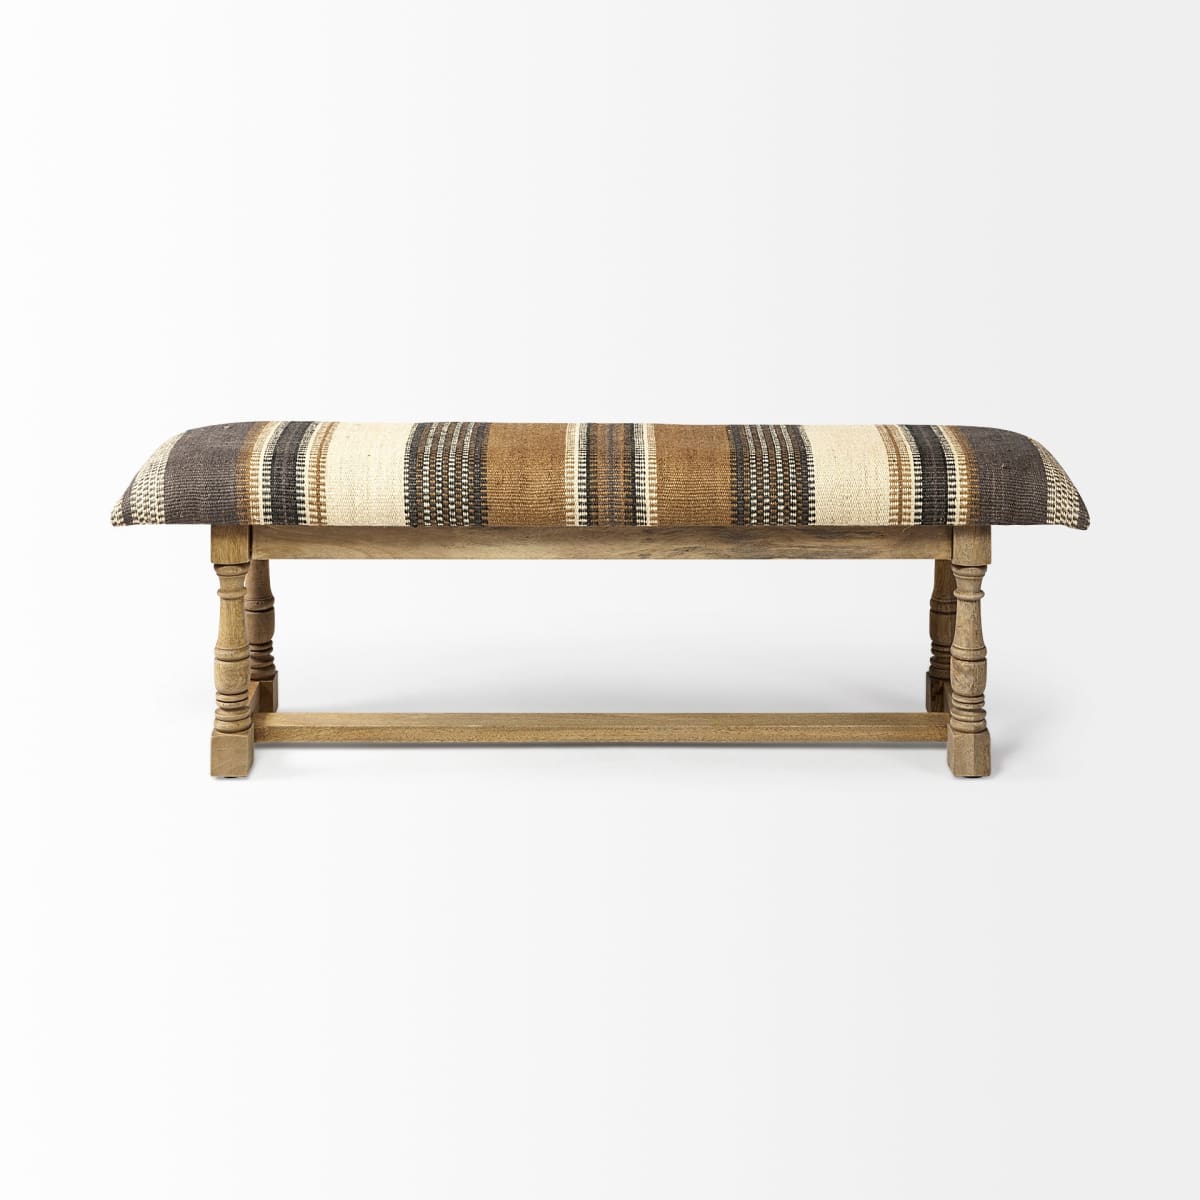 Greenfield Bench Multi Colored Jute | Brown Wood - benches